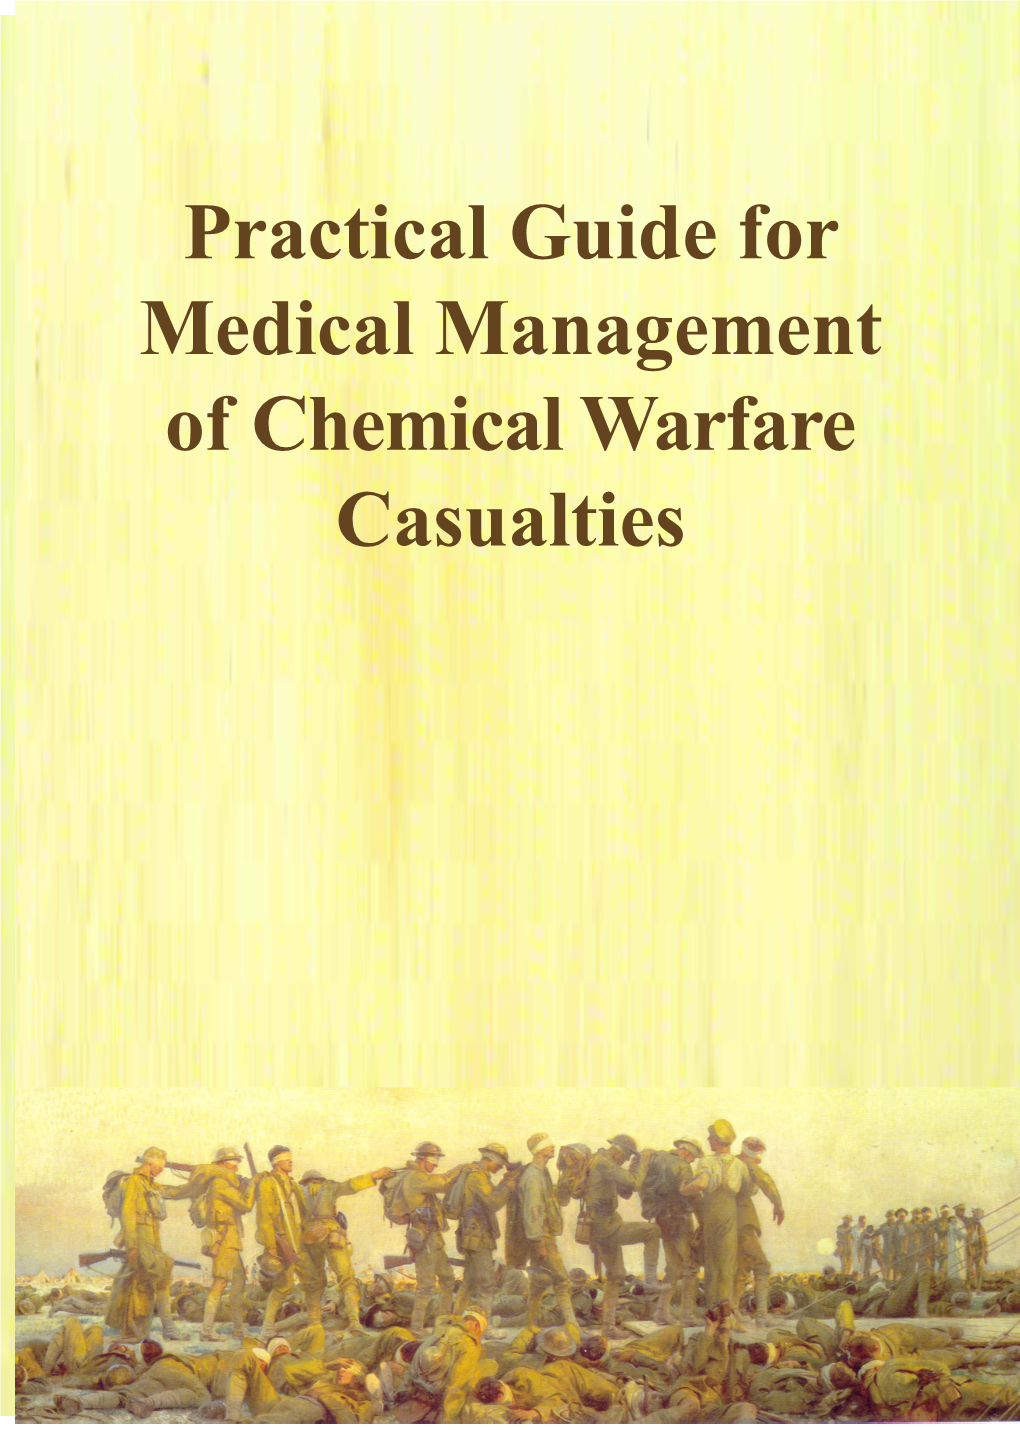 Practical Guide for Medical Management of Chemical Warfare Casualties